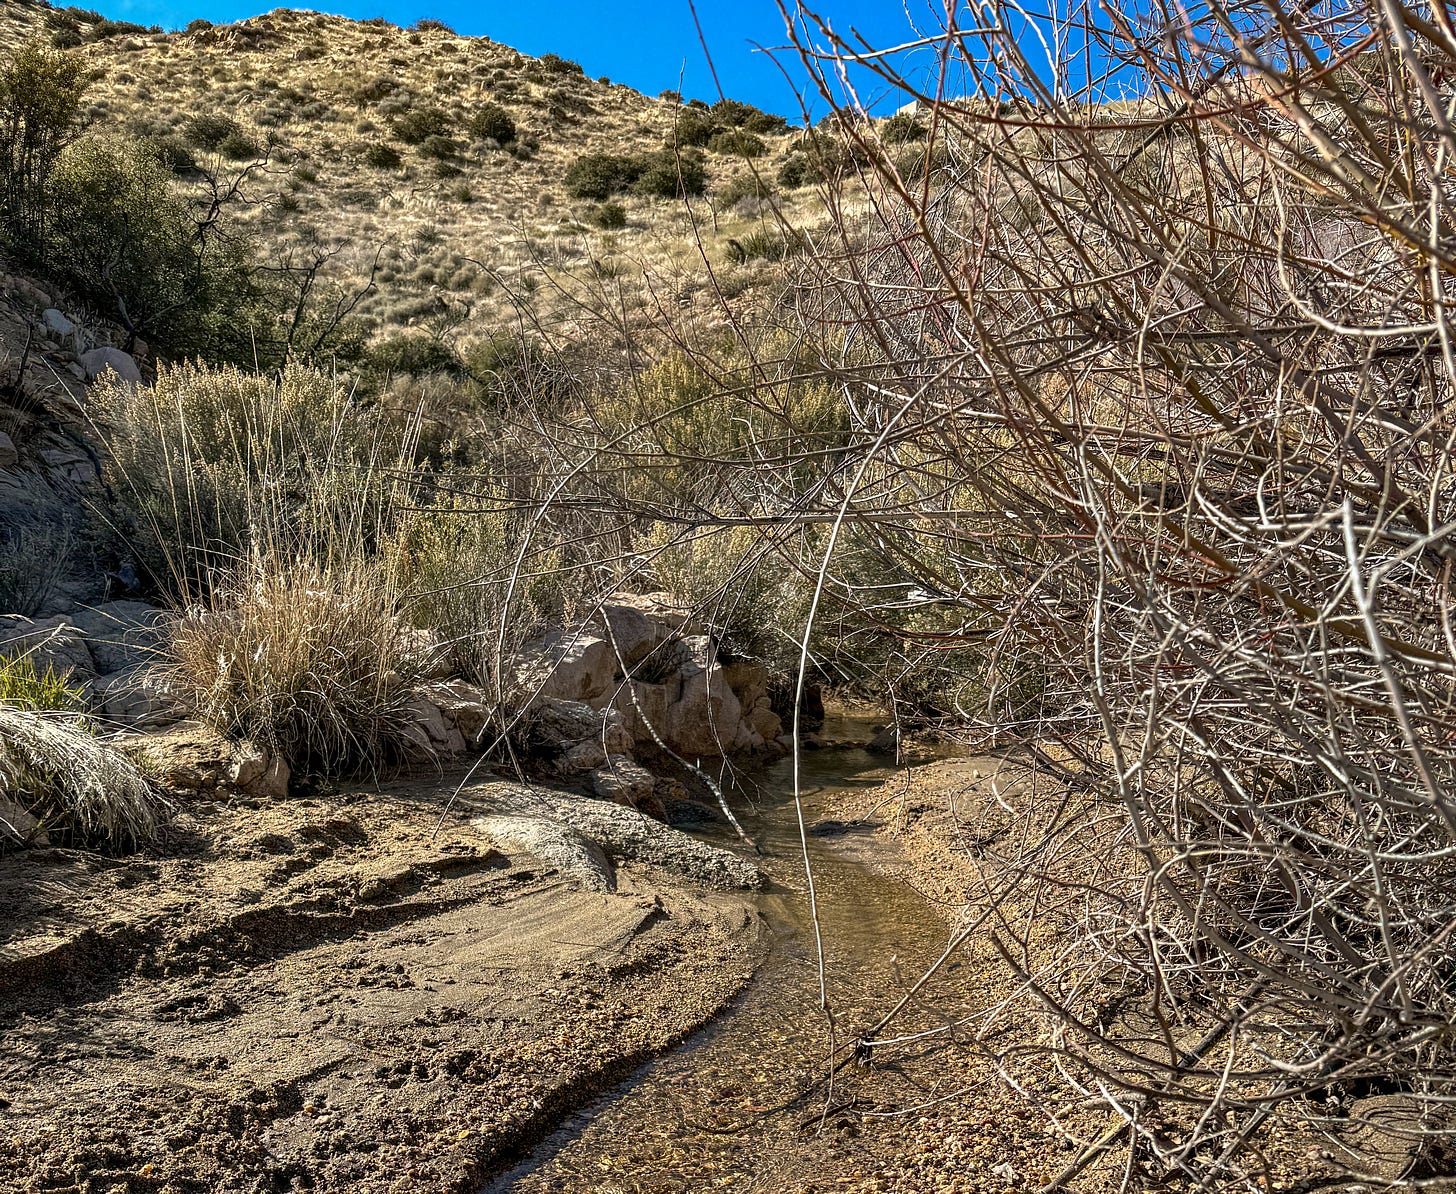 A small stream of clear water flows through brown sand in the desert, with shrubs on both sides of the stream and a mountain rising in the background against a clear blue sky.